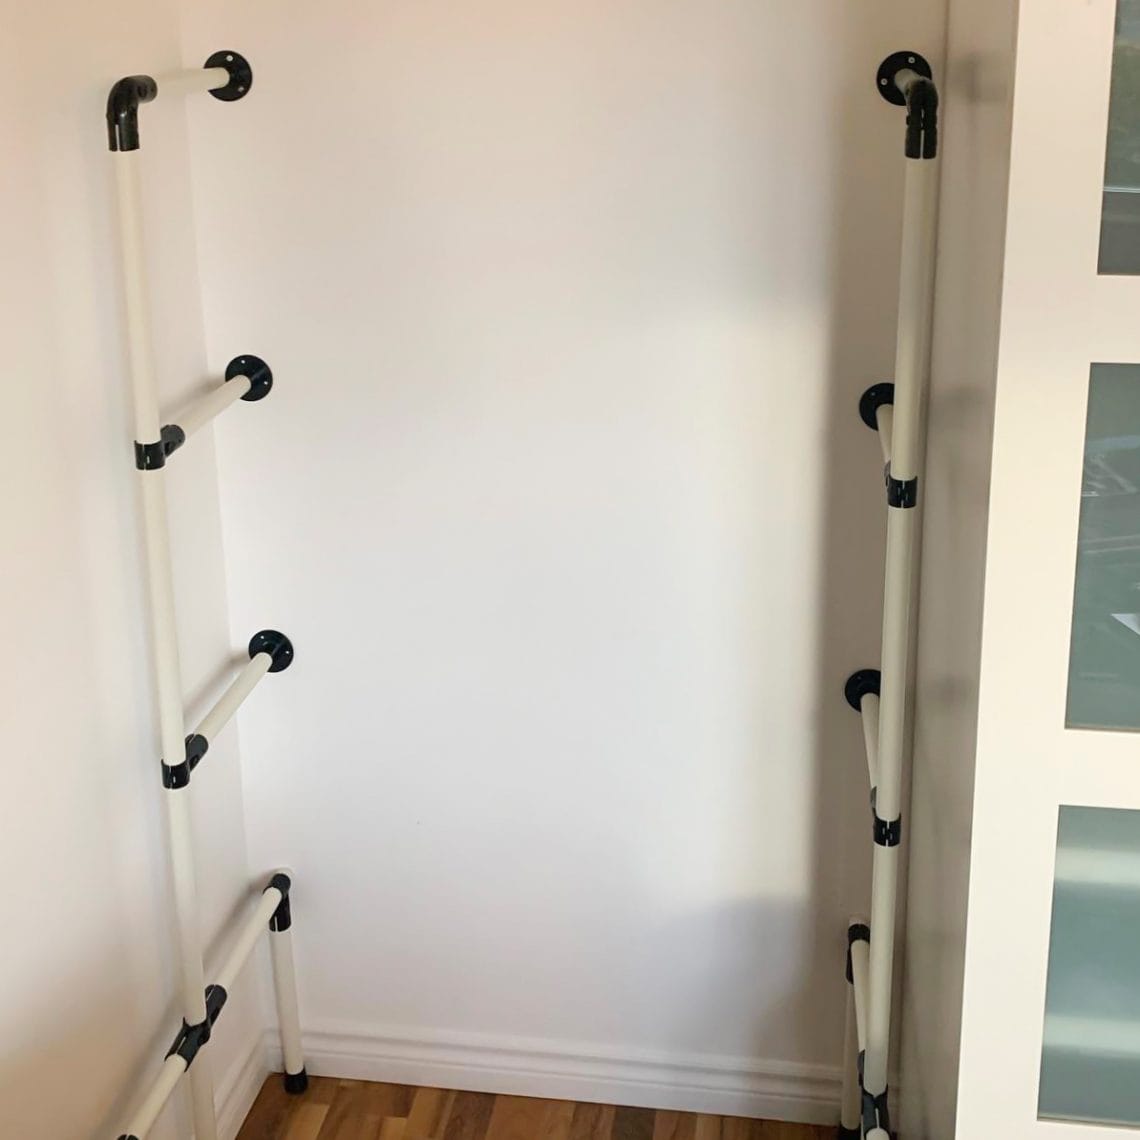 DIY shelving system with pipes and fittings